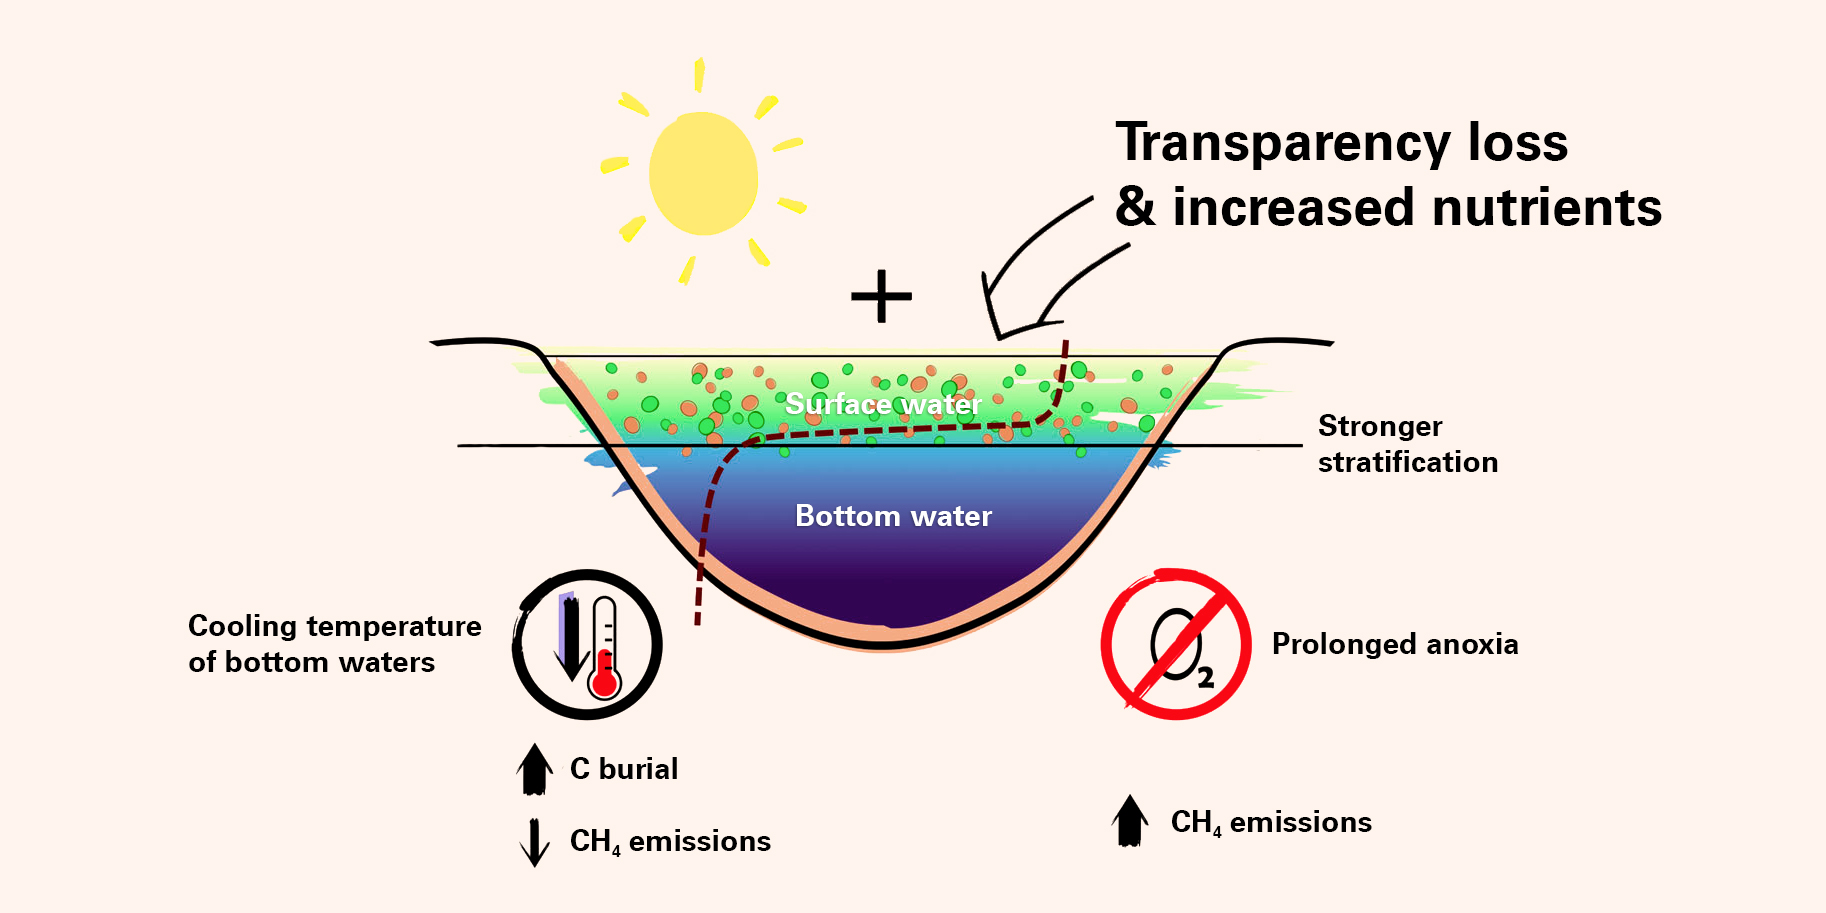 Effects of climate change on the water temperature, water transparency, density stratification and oxygen content in lakes. In contrast to clear lakes, nutrient-rich and thus more turbid lakes develop a “thermal shield” that can cause the deeper part of the lake to cool down. (Illustration: University of Basel)